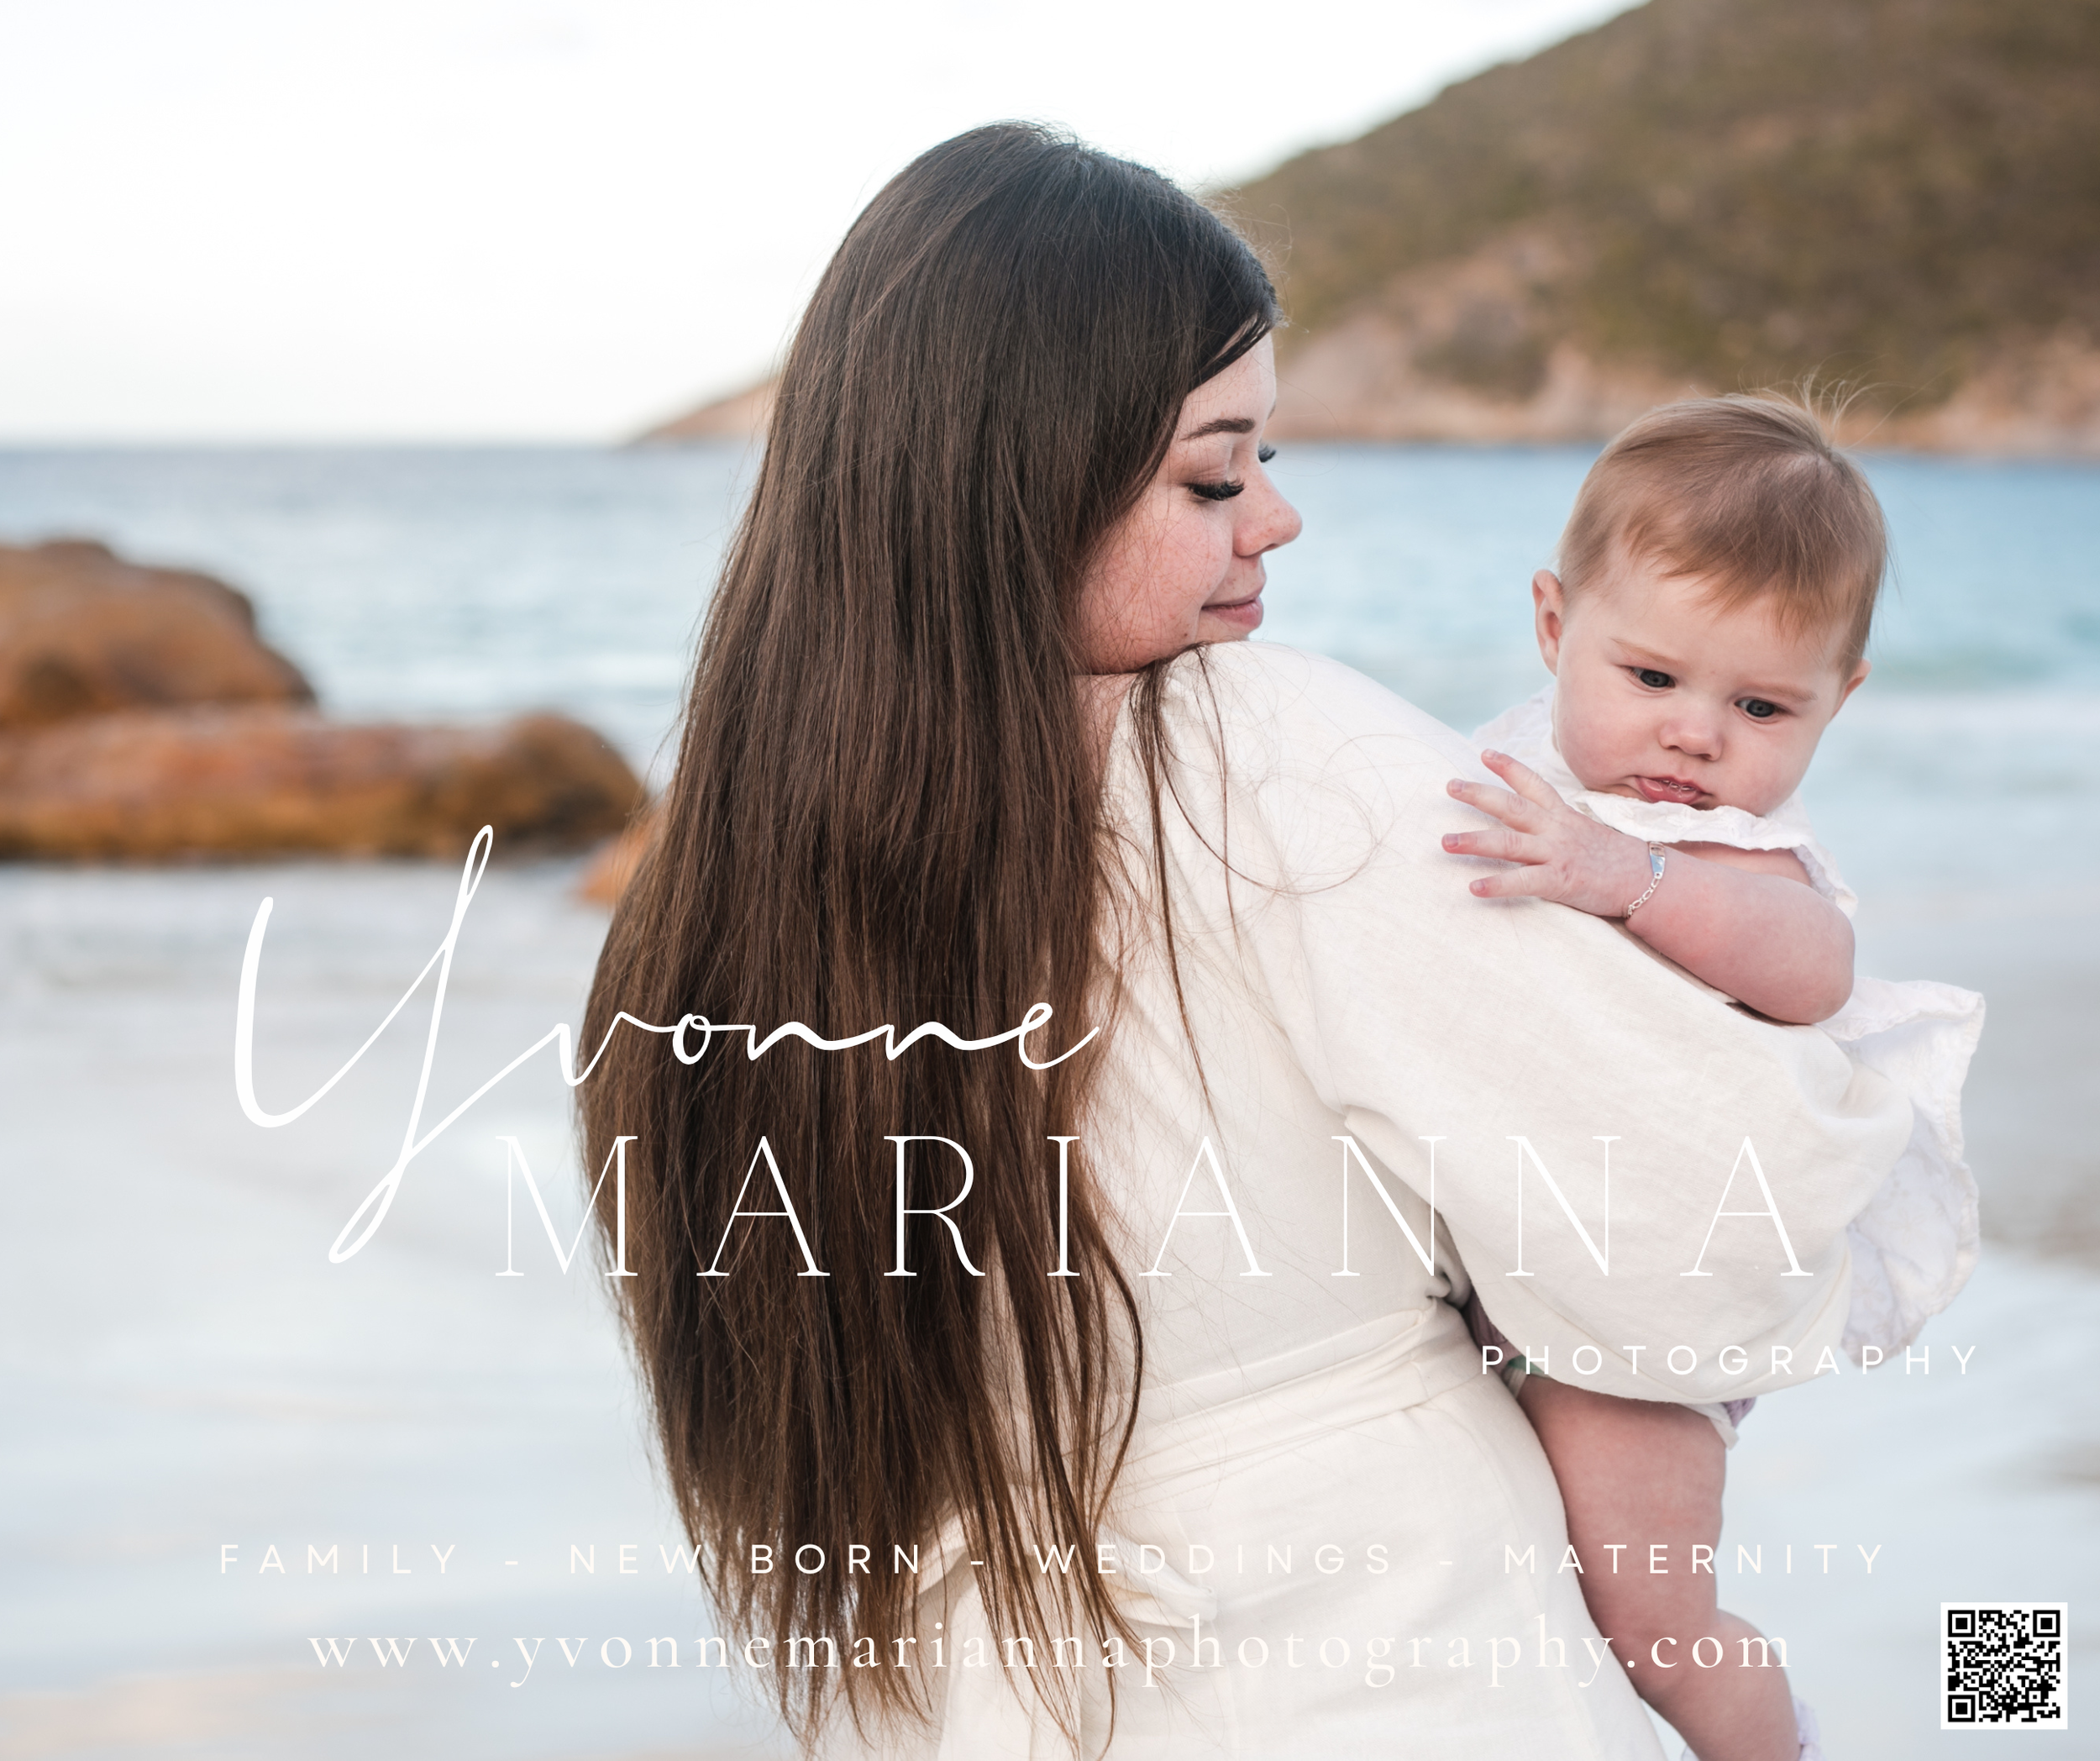 Yvonne Marianna Family Photography 33.png